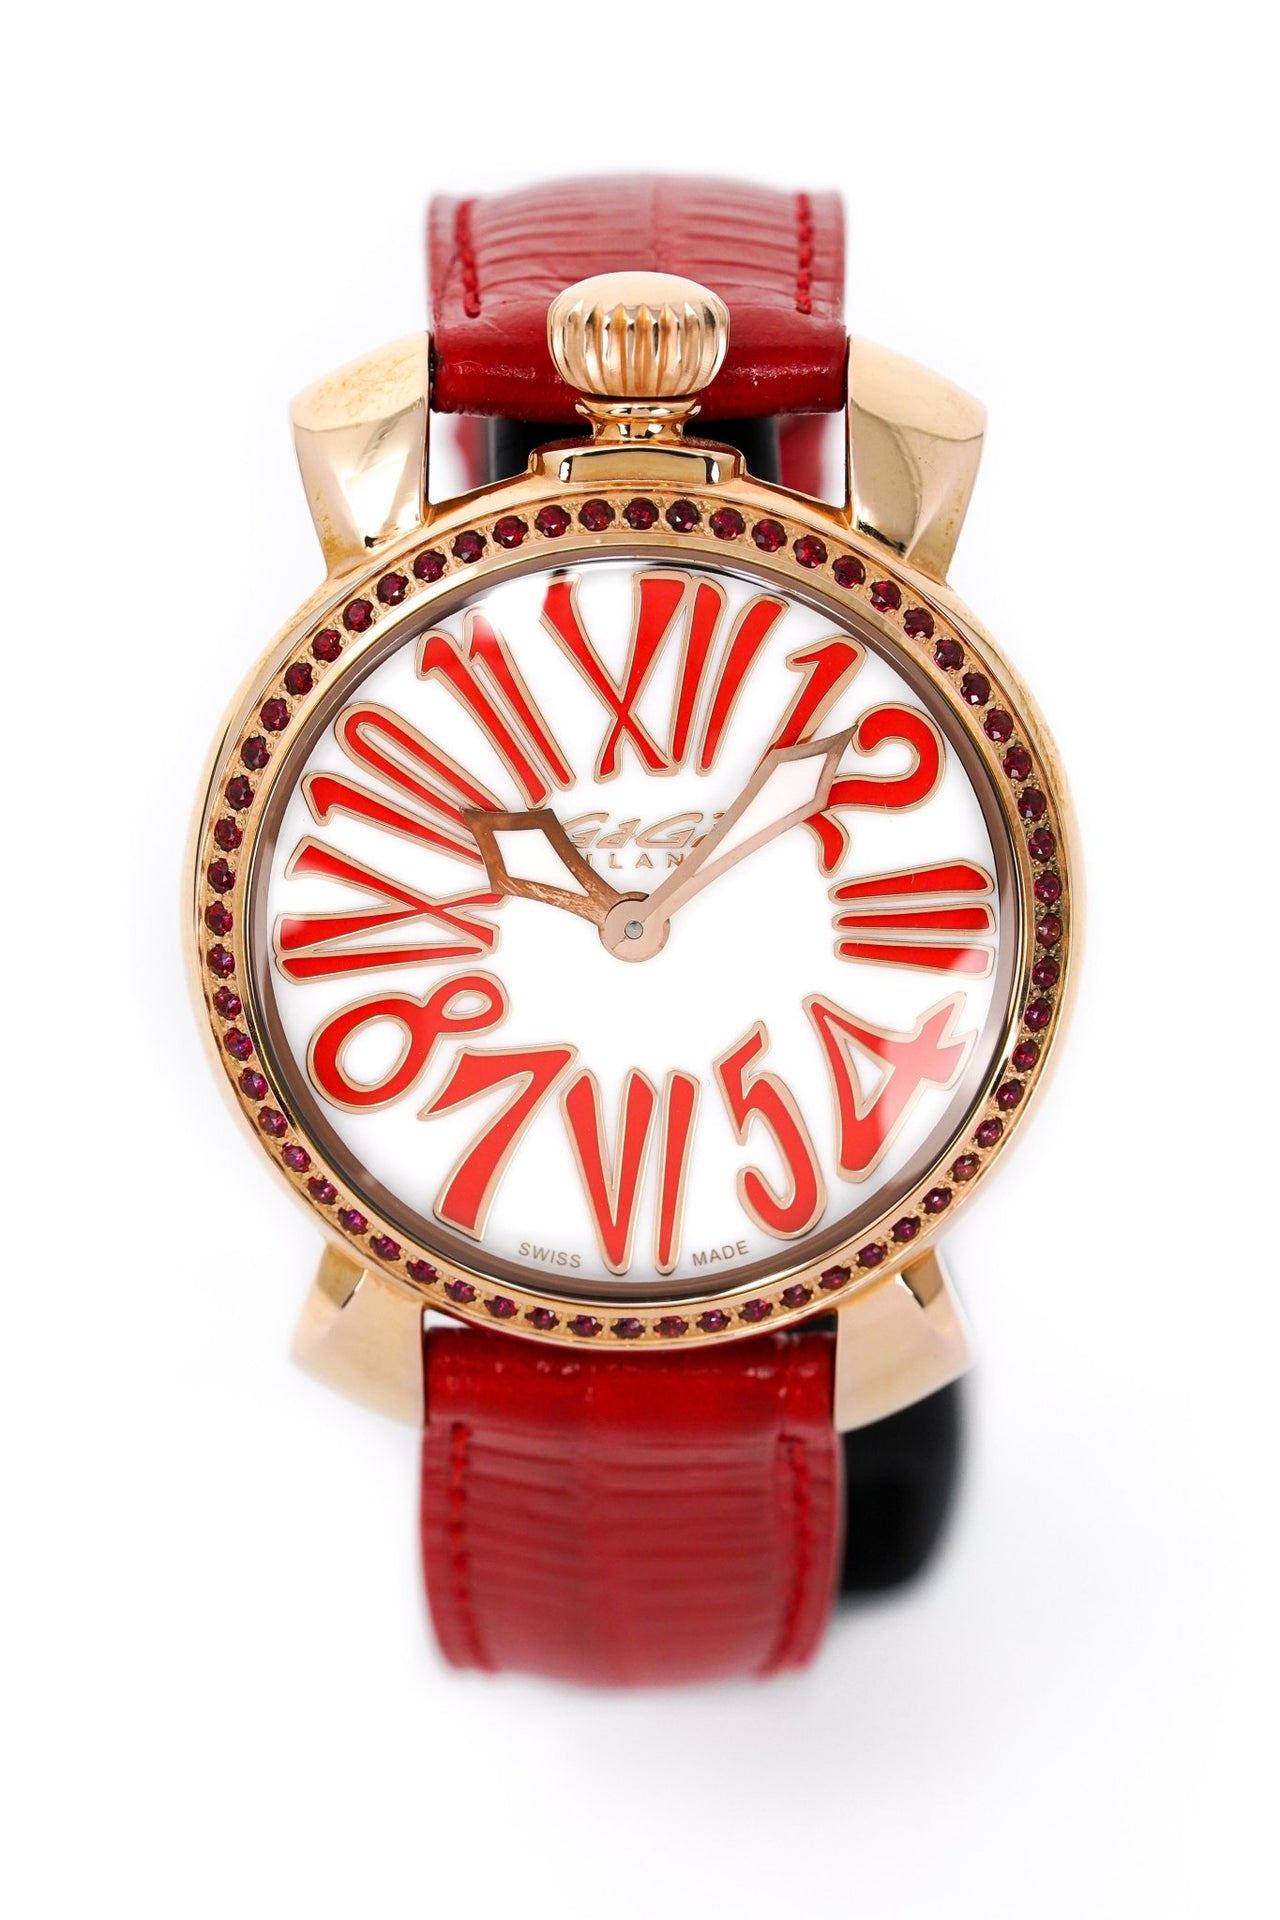 GaGà Milano Ladies Watch Manuale 35mm Stones Red Topaz 6026.02 - Watches & Crystals